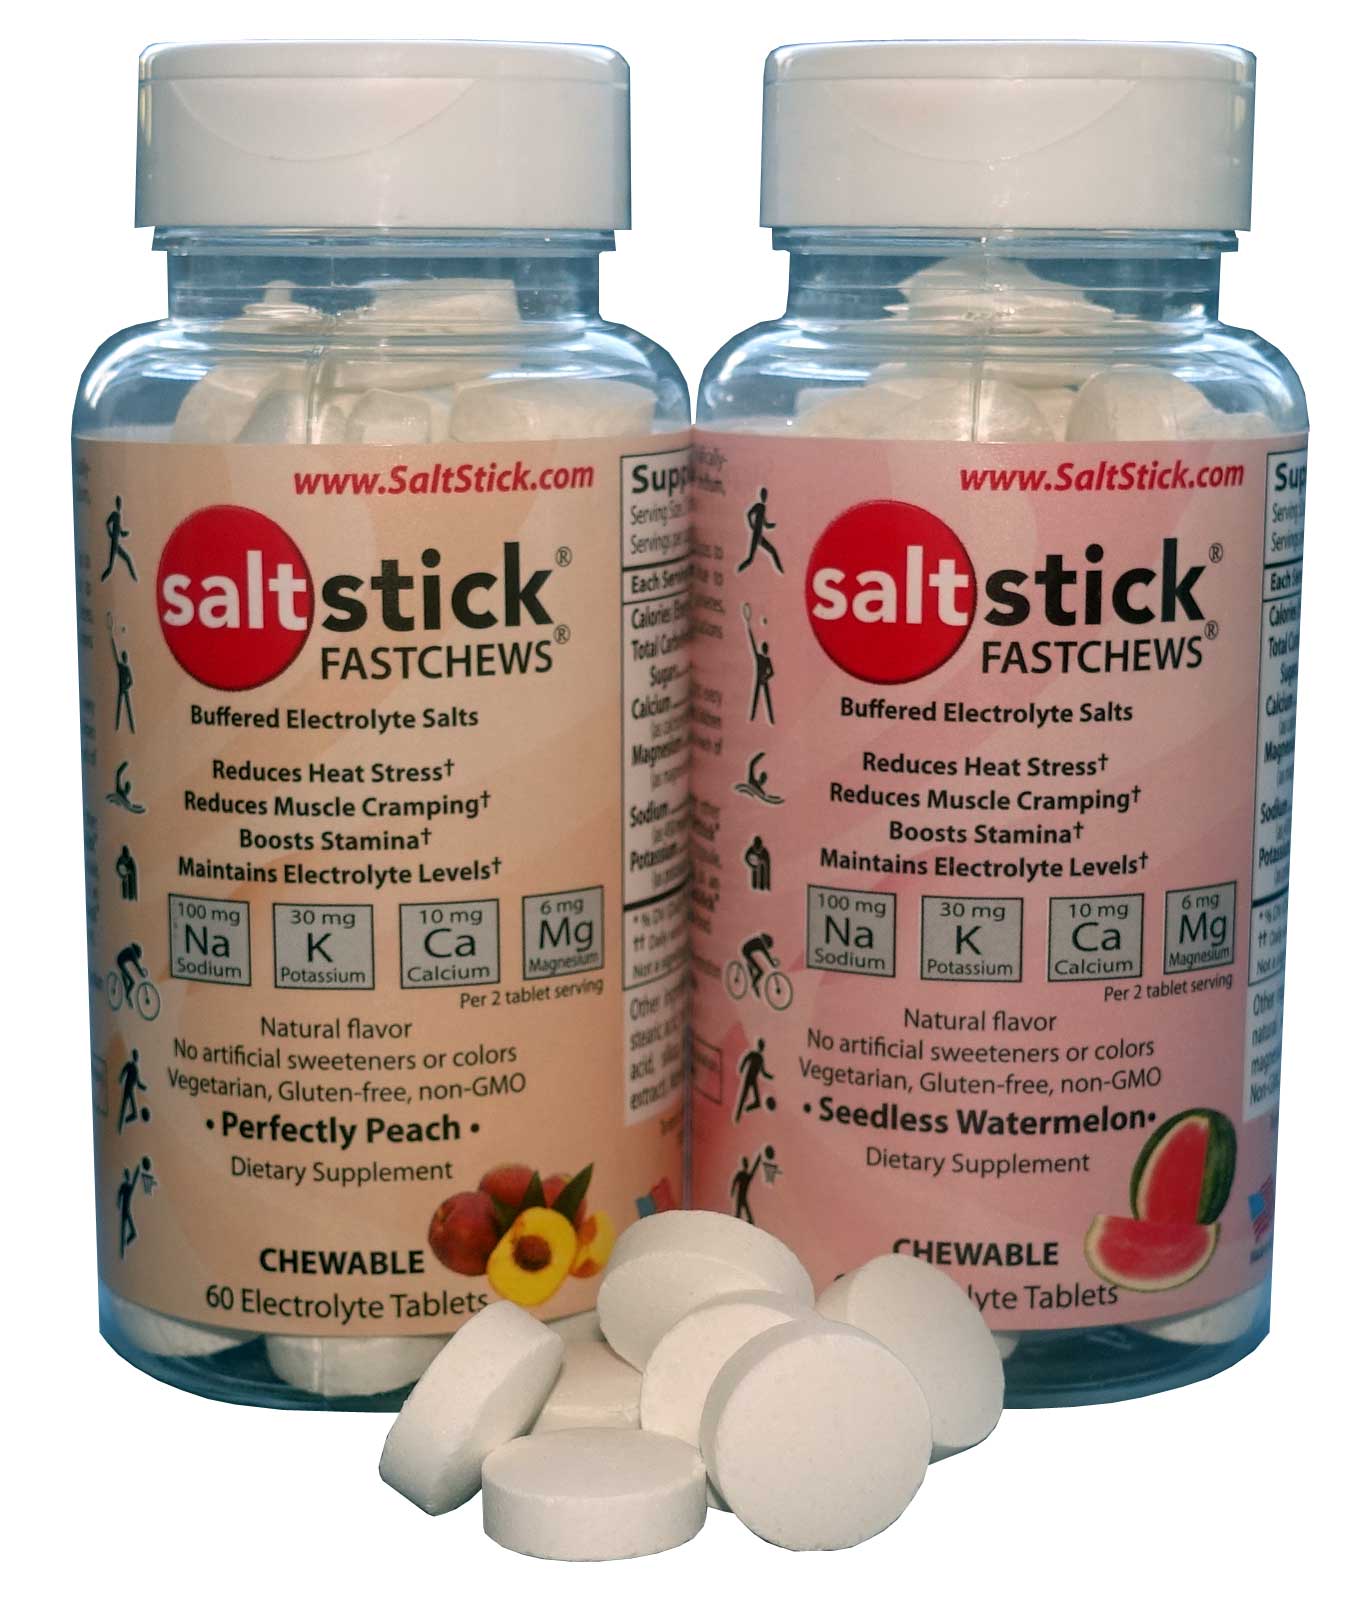 SaltStick Fastchews Perfectly Peach and Seedless Watermelon